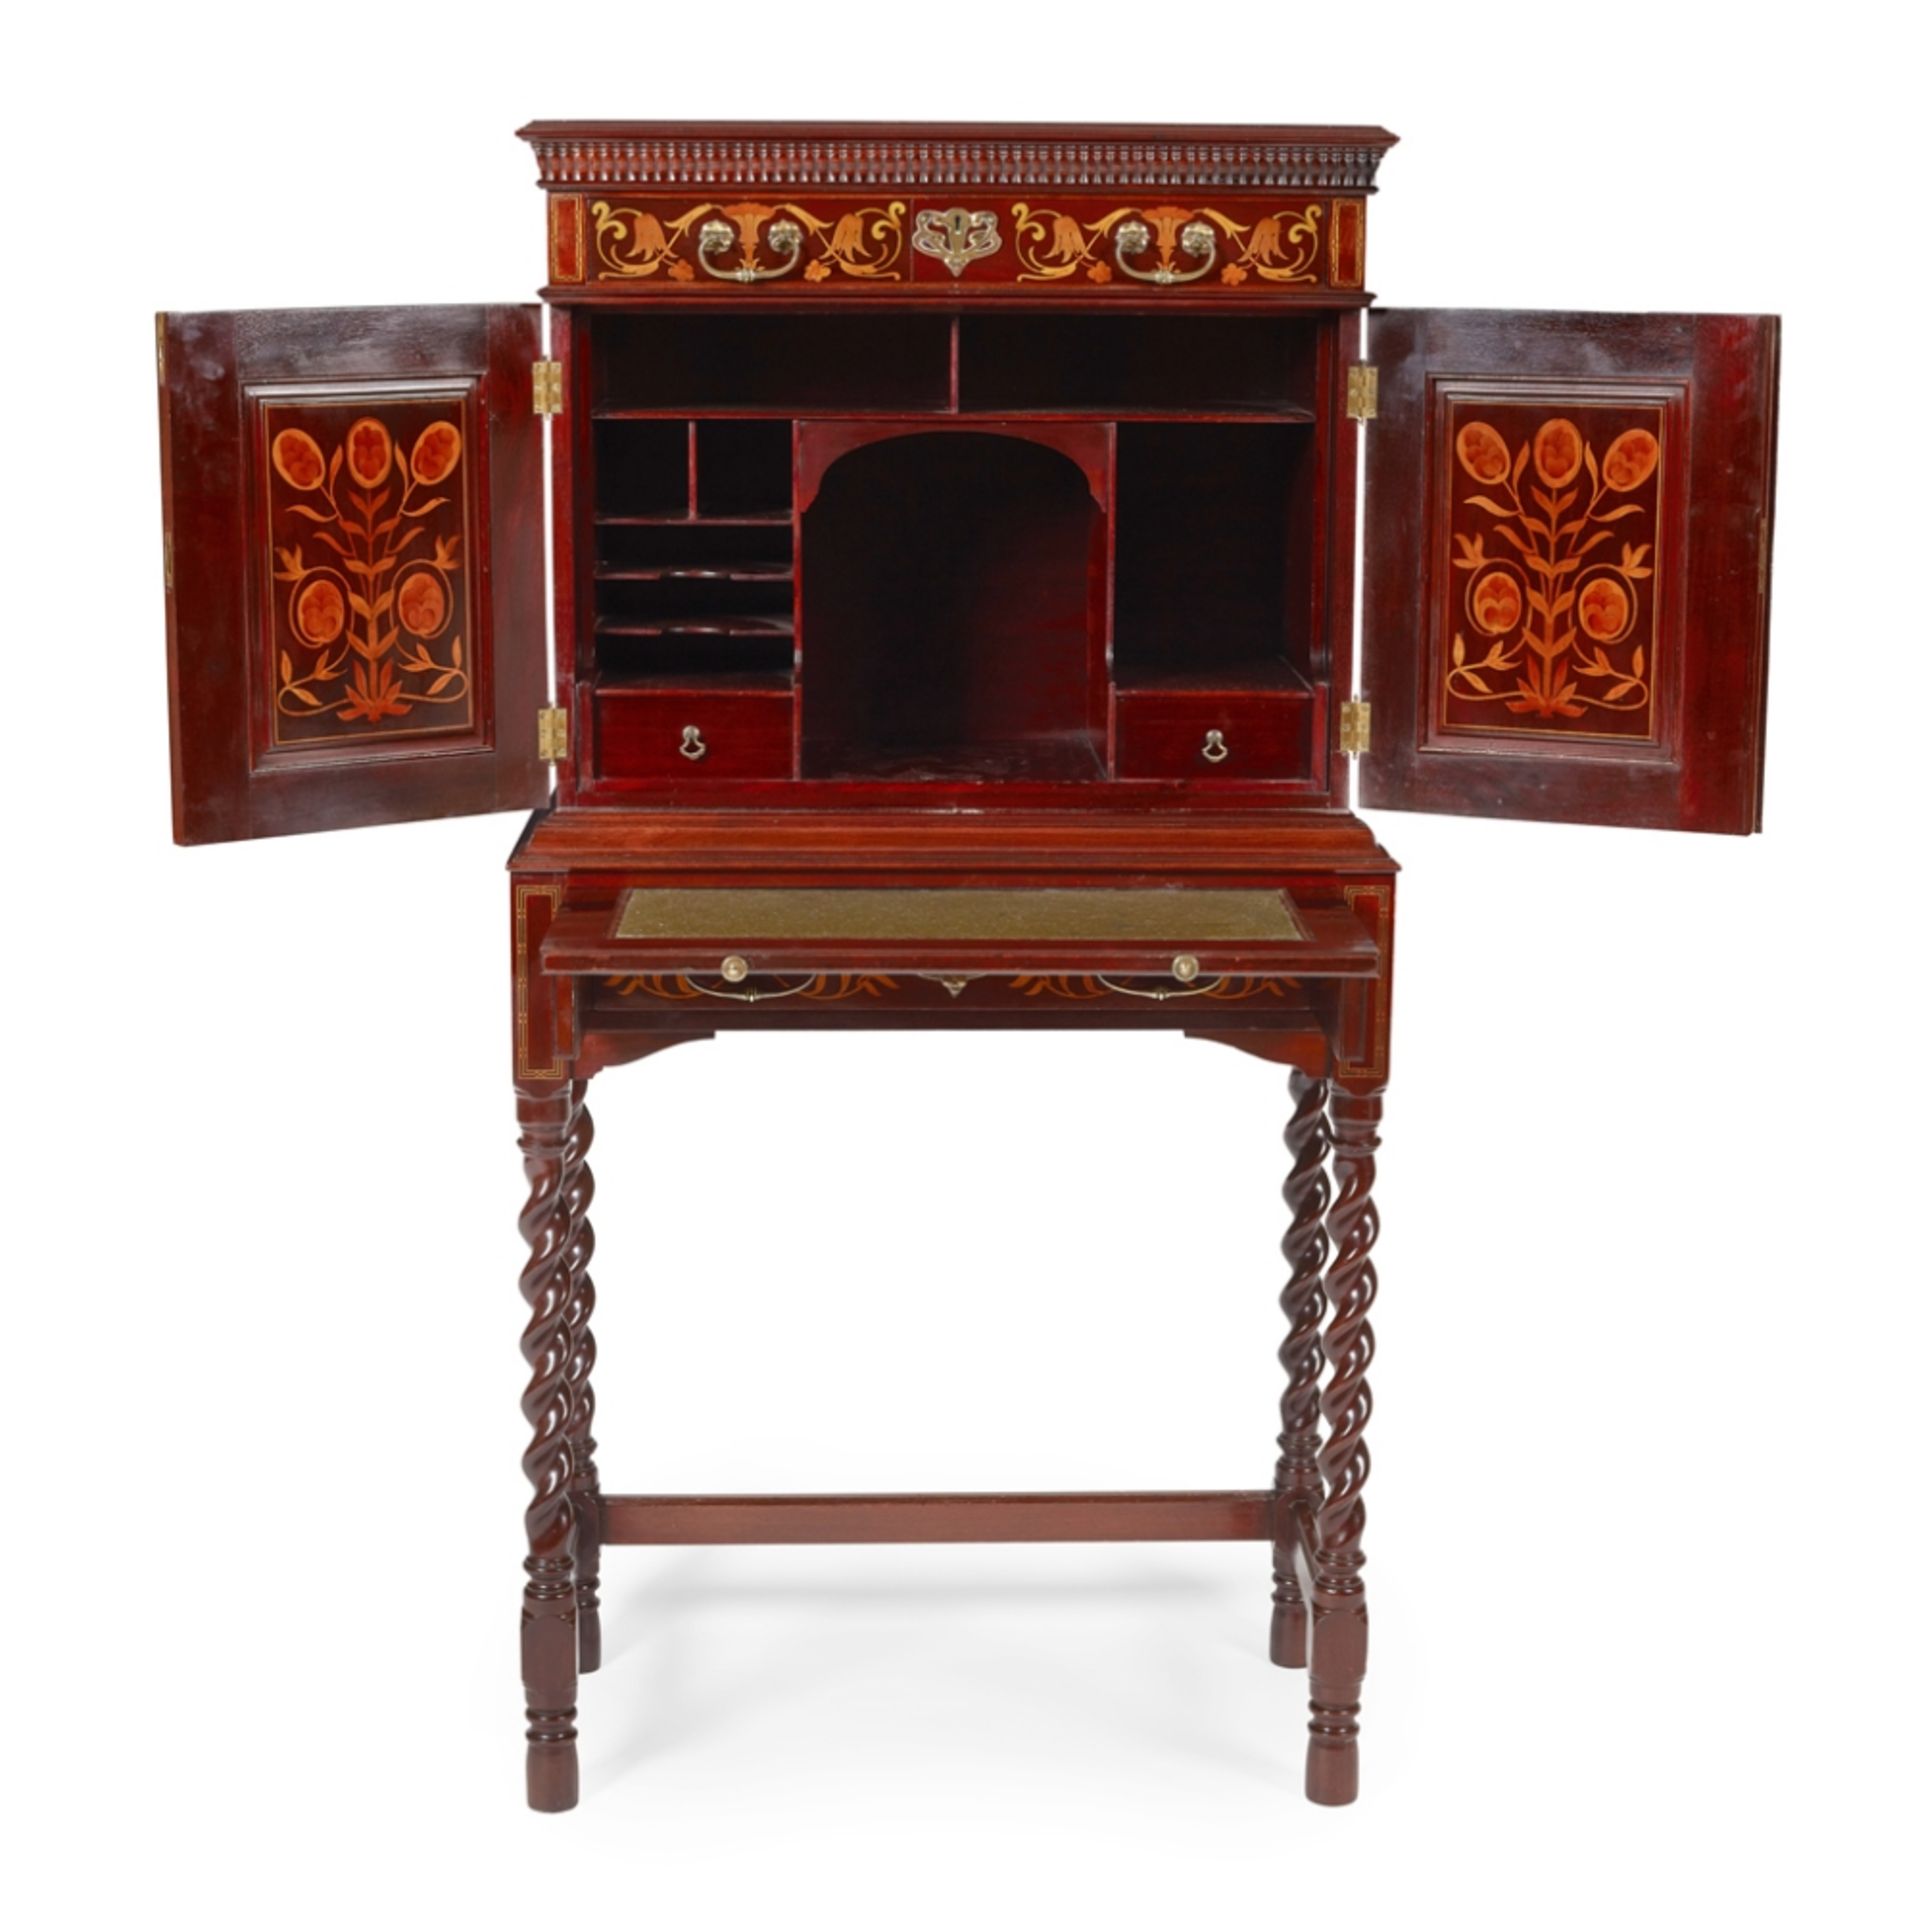 SHAPLAND & PETTER, BARNSTAPLE ARTS & CRAFTS INLAID MAHOGANY CABINET, CIRCA 1900 with marquetry - Image 3 of 3